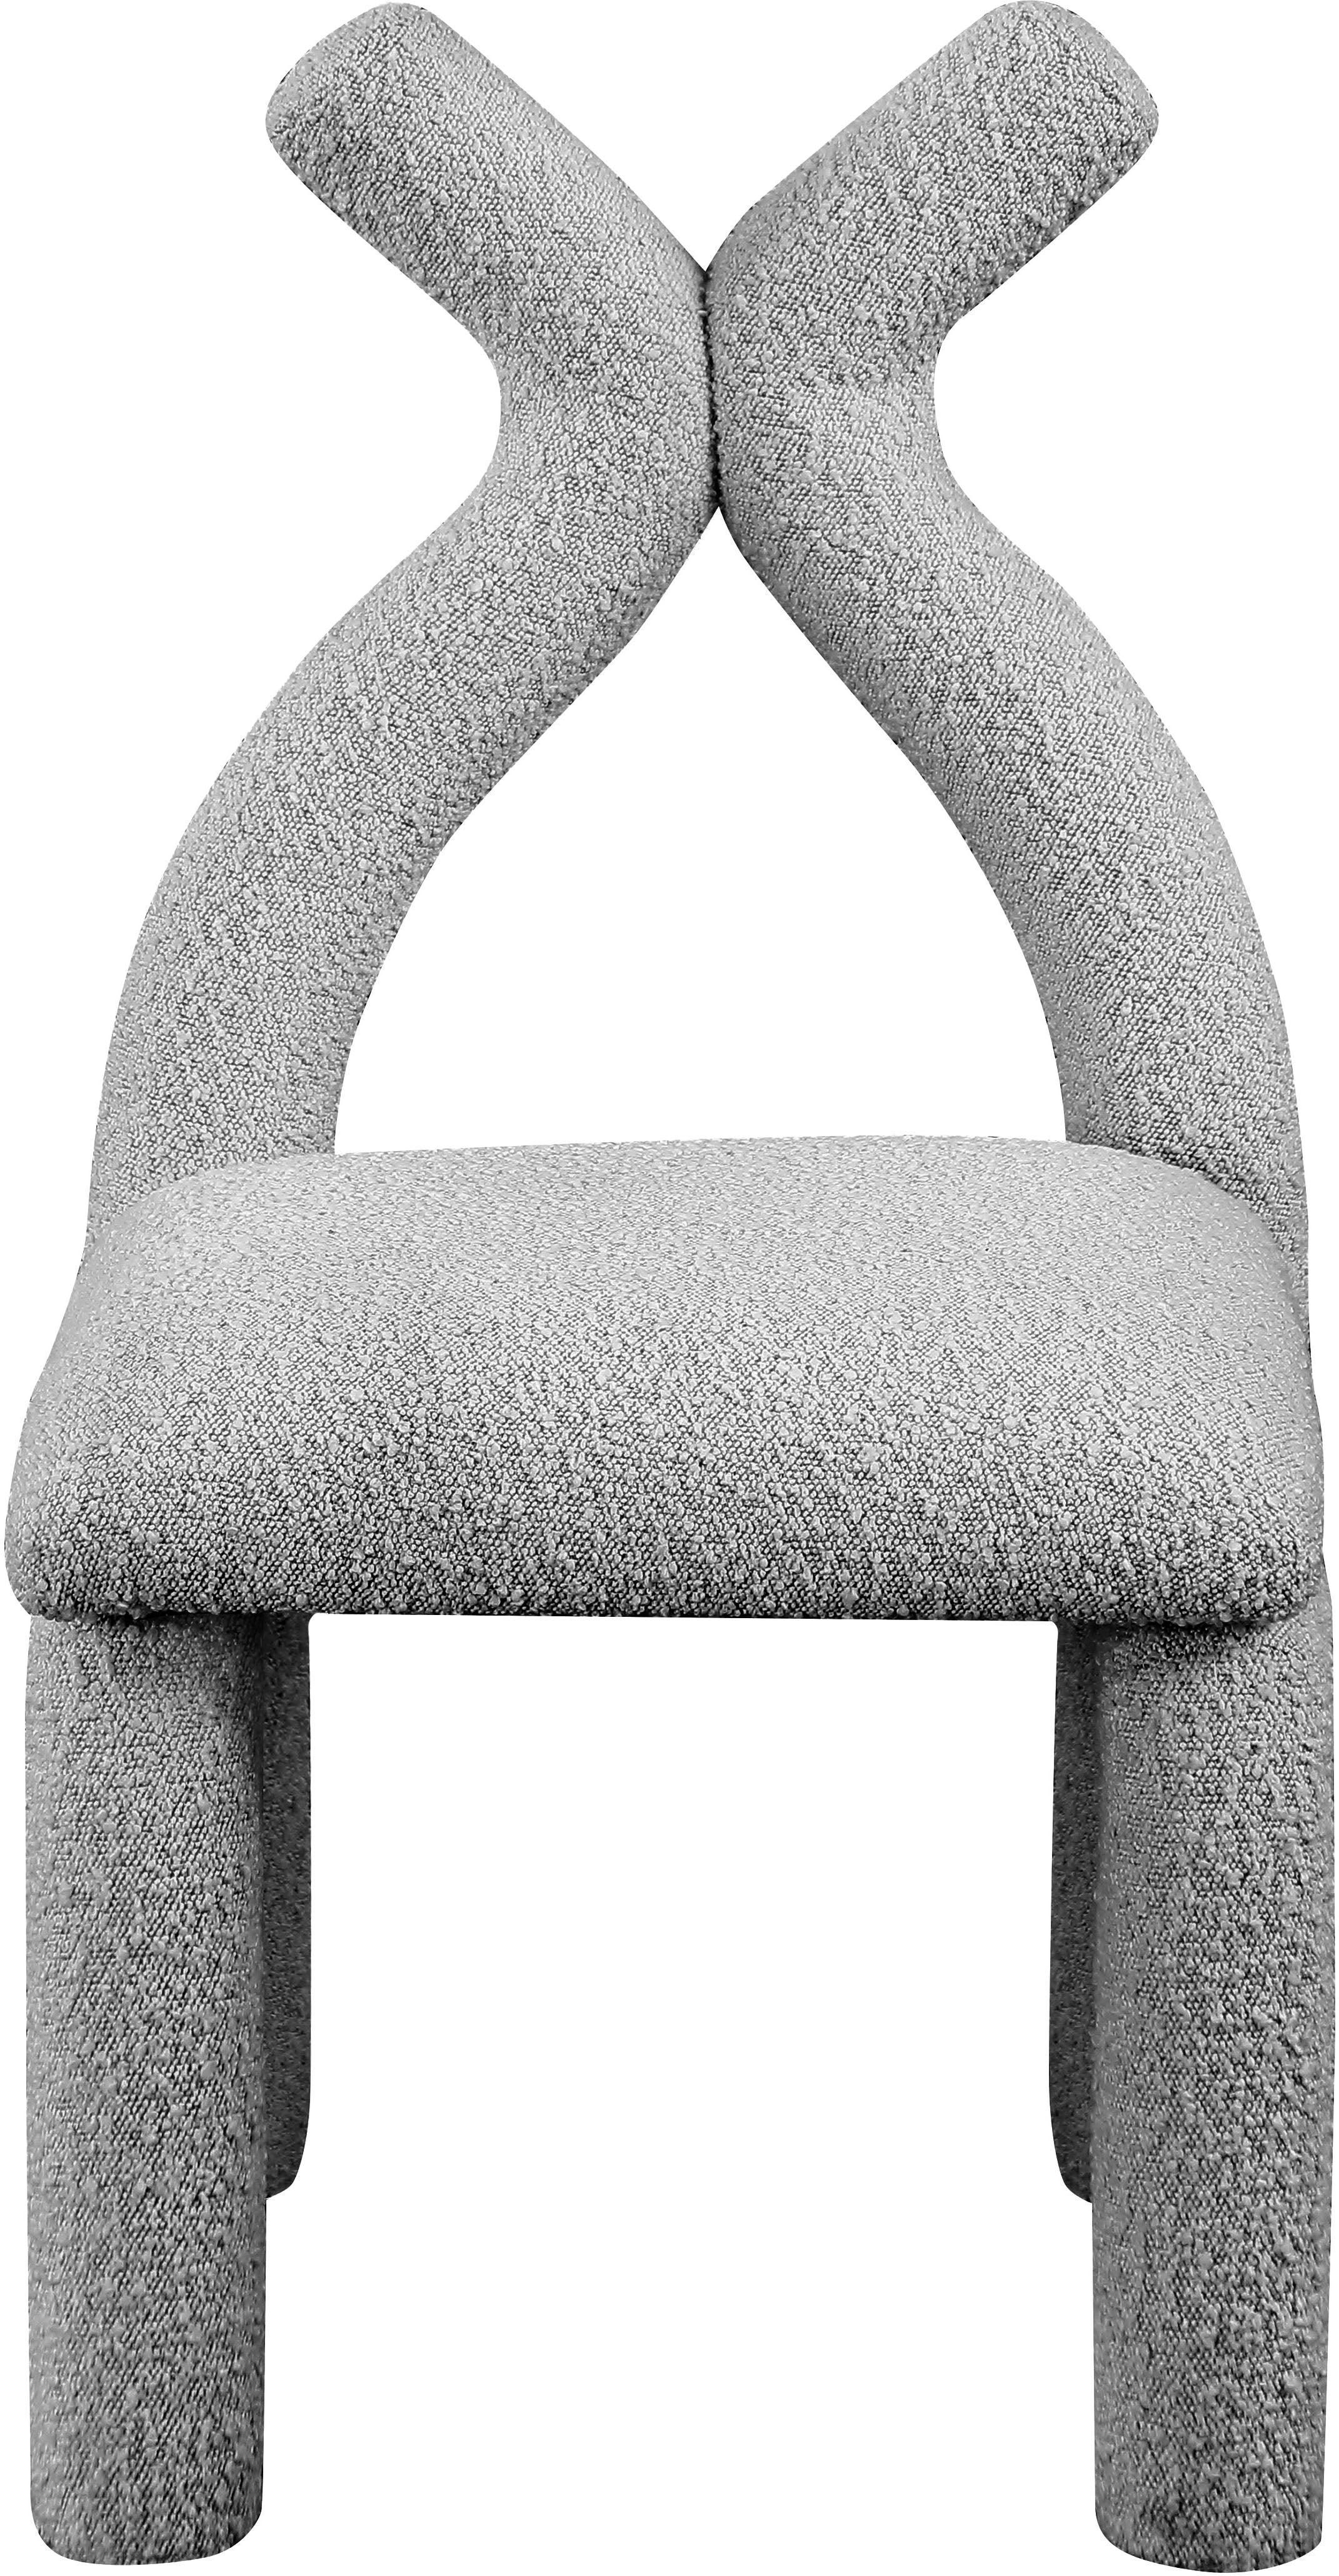 Xena Boucle Fabric Accent Chair / Dining Chair